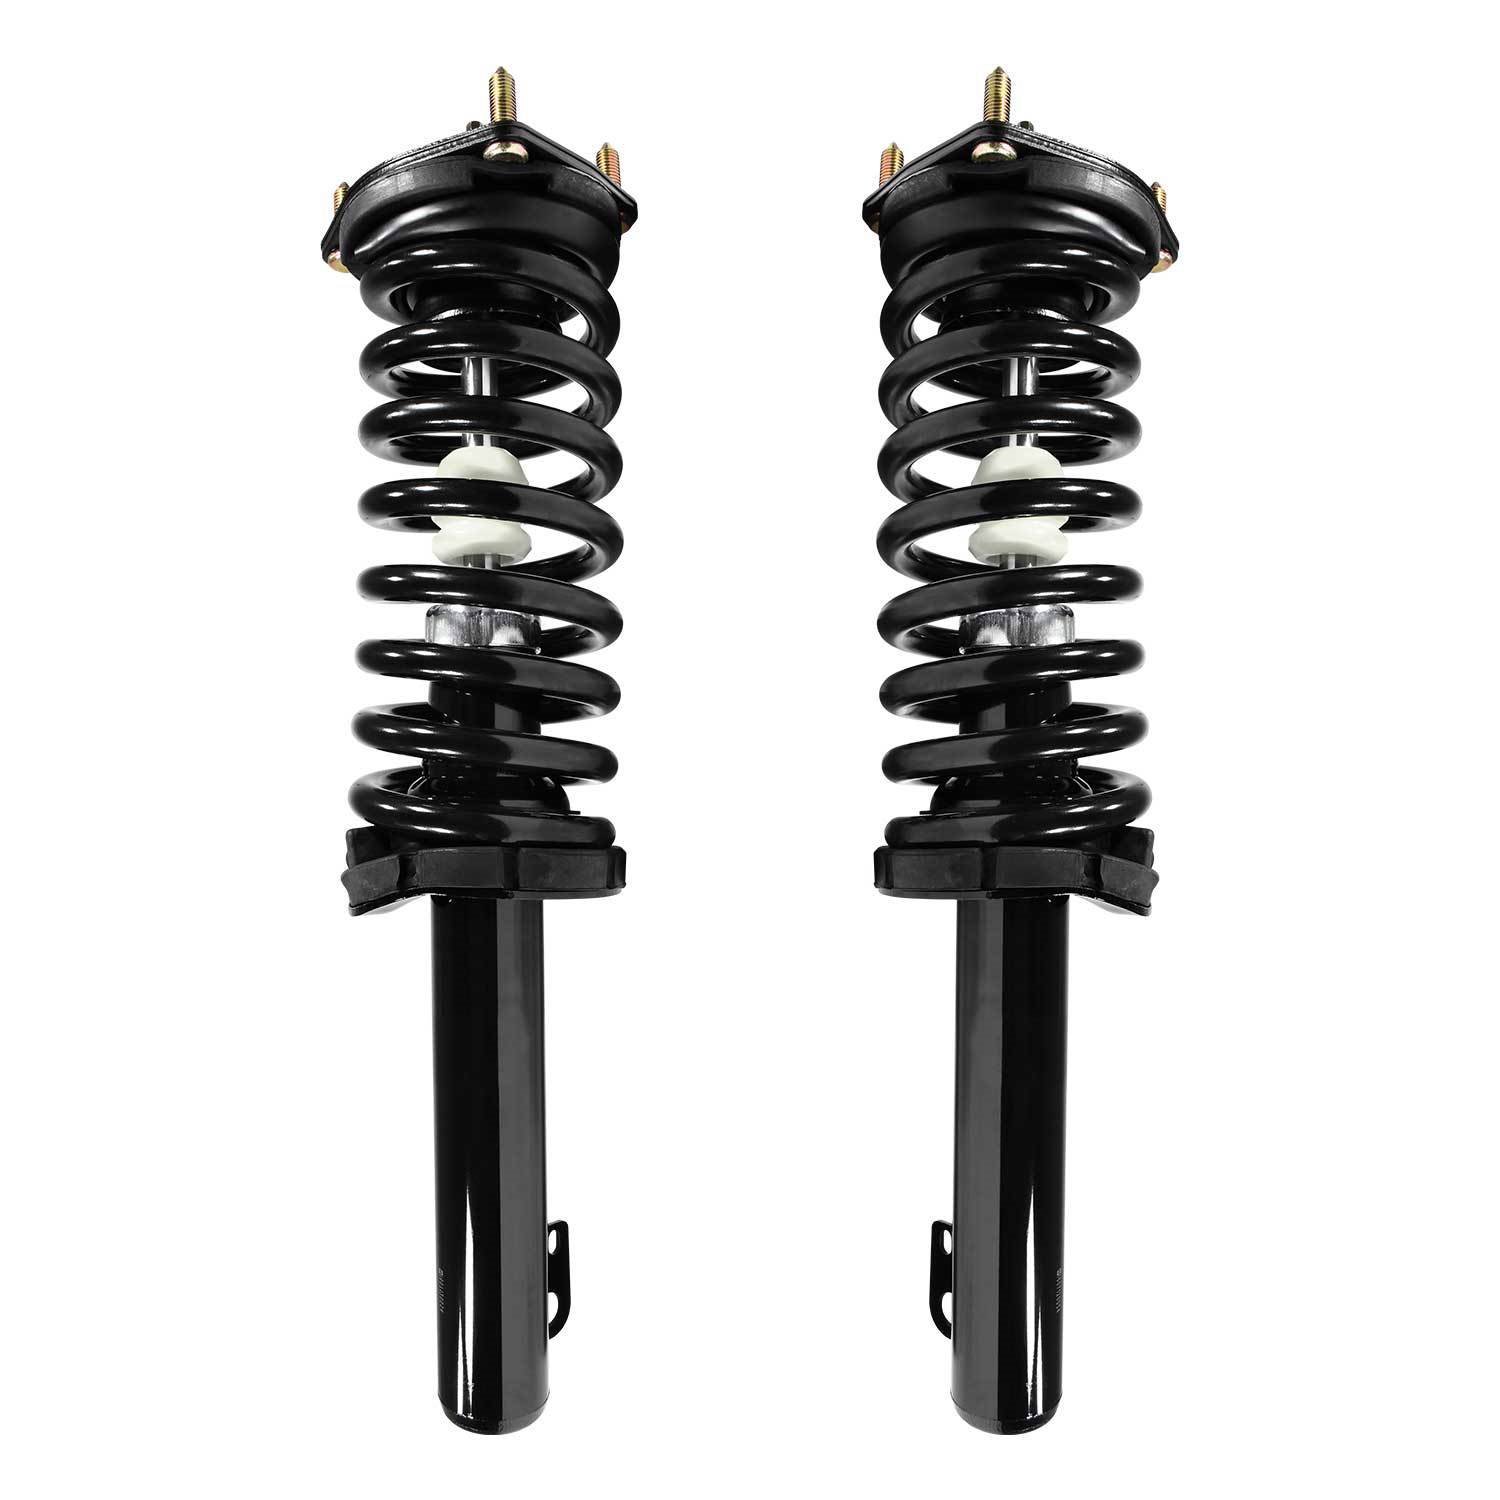 2-11211-11212-001 Suspension Strut & Coil Spring Assembly Set Fits Select Jeep Commander, Jeep Grand Cherokee